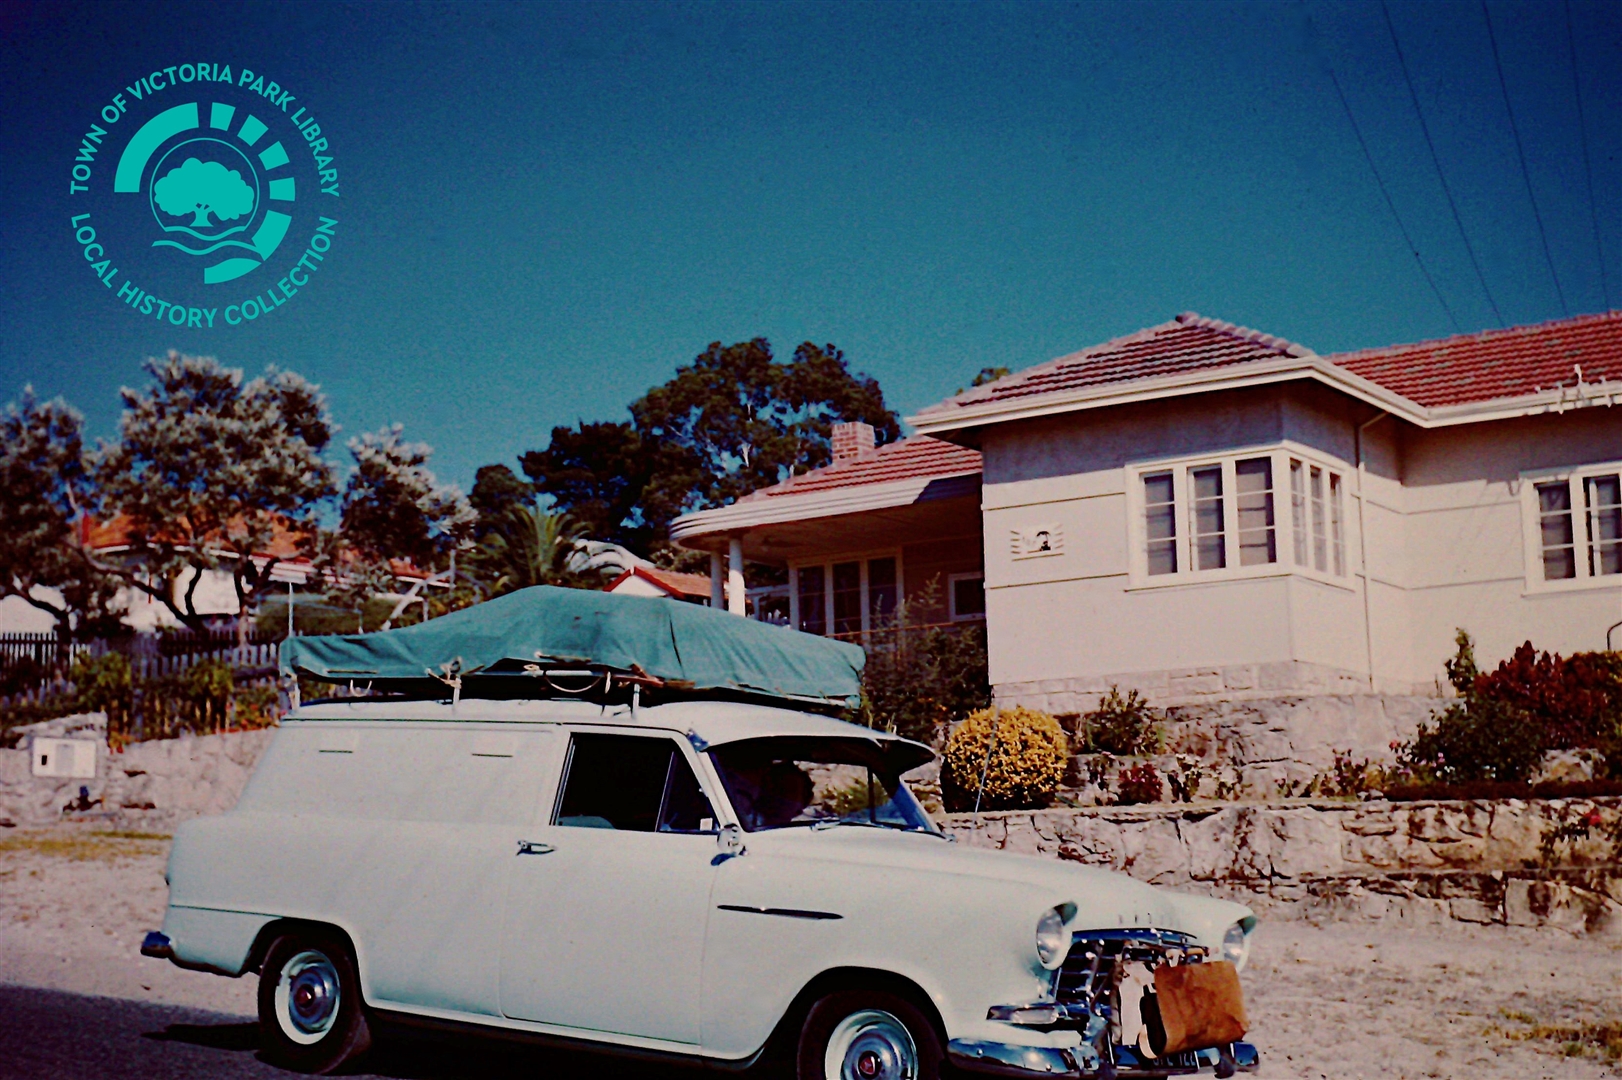 PH00043-15_ 8 February 1960_Van packed to leave for NSW in front of 107 Westminster St EVP Image